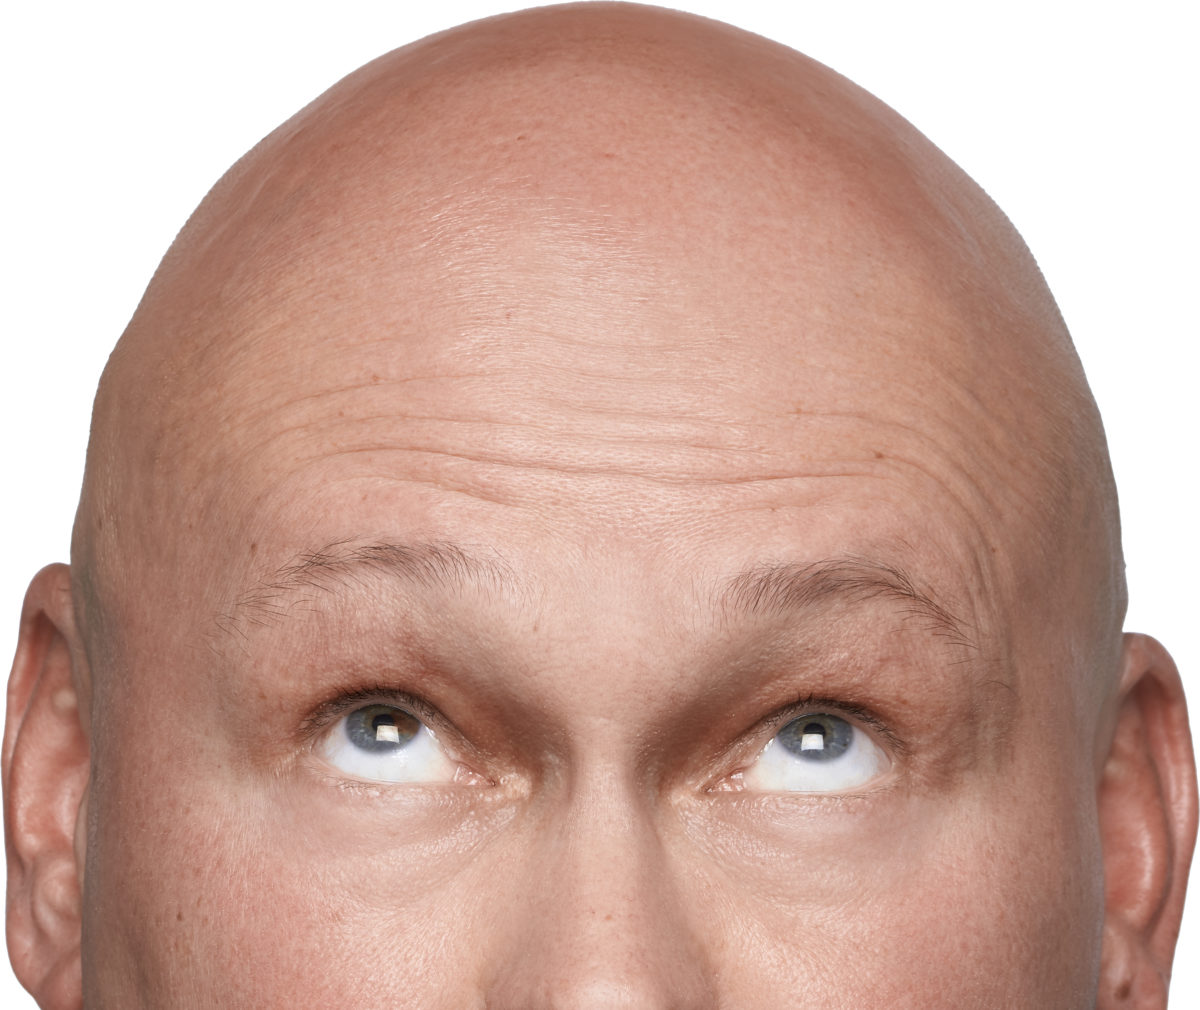 Bald Men Don’t Use Hairspray. Do They?